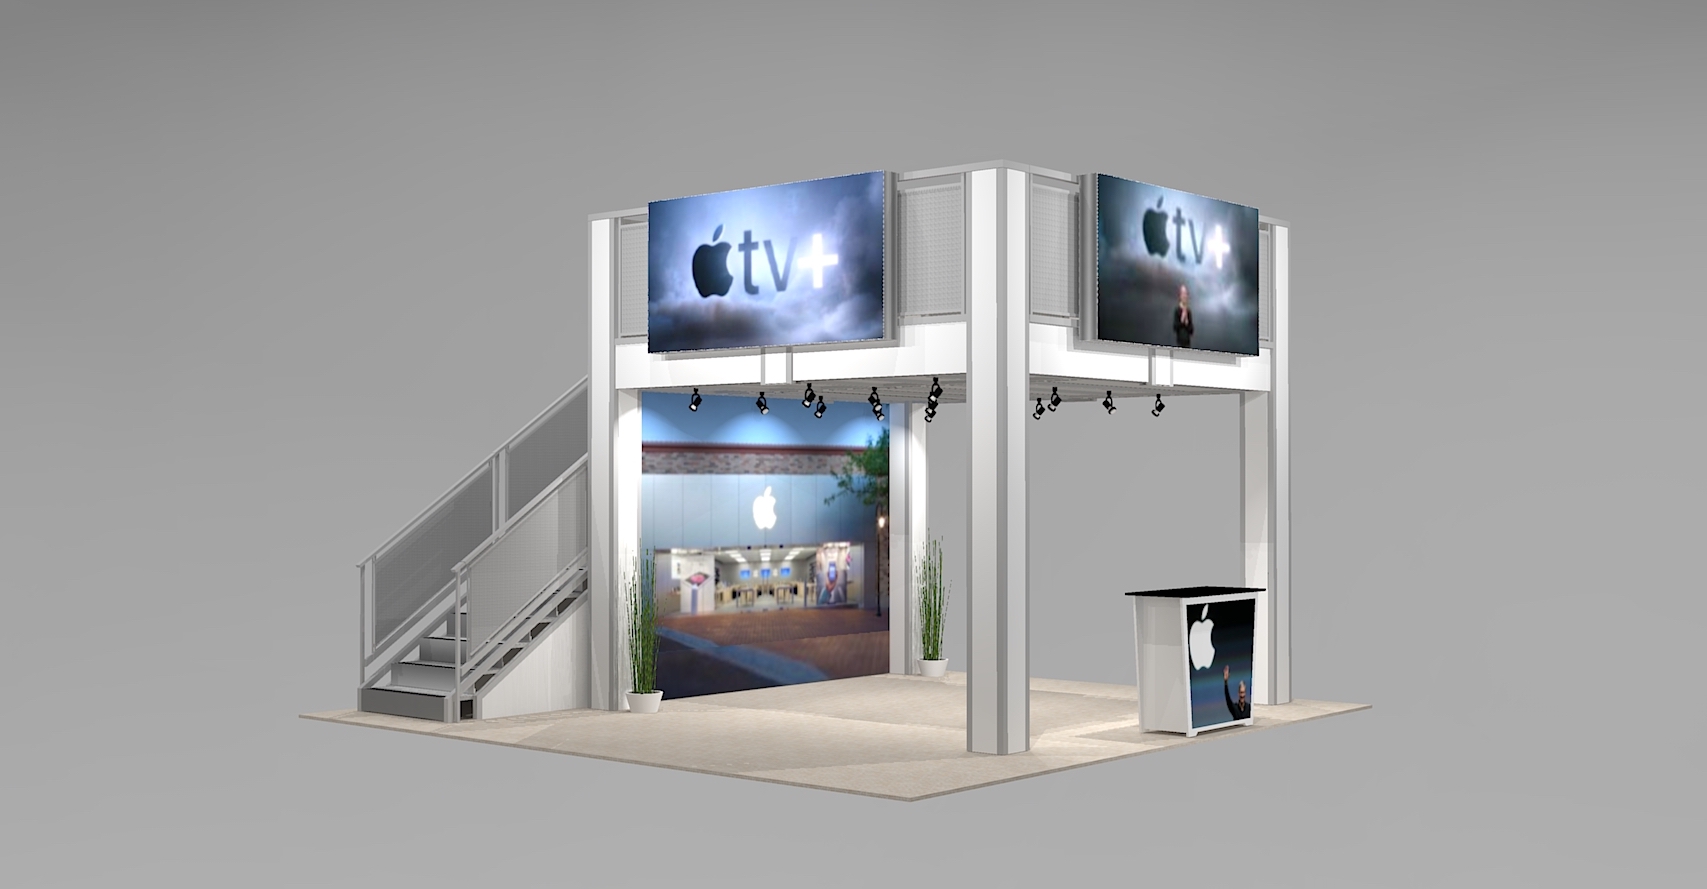 Trade Show Double Deck for 20x20 Space with Open Floor Plan and Backlit Logo Signs